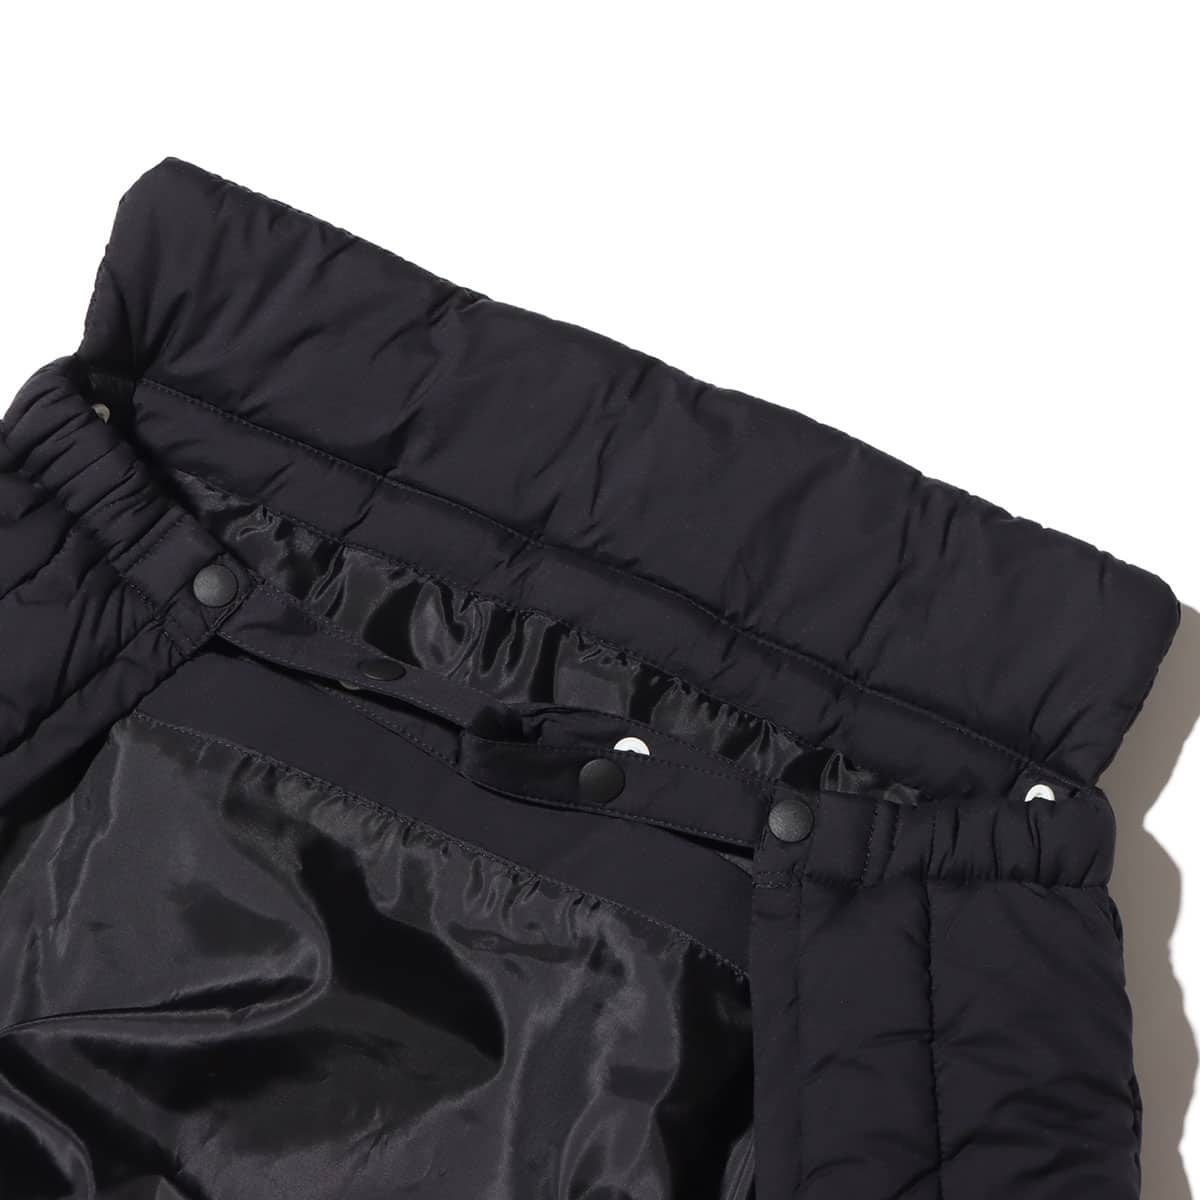 THE NORTH FACE BABY SHELL BLANKET BLACK 23FW-I